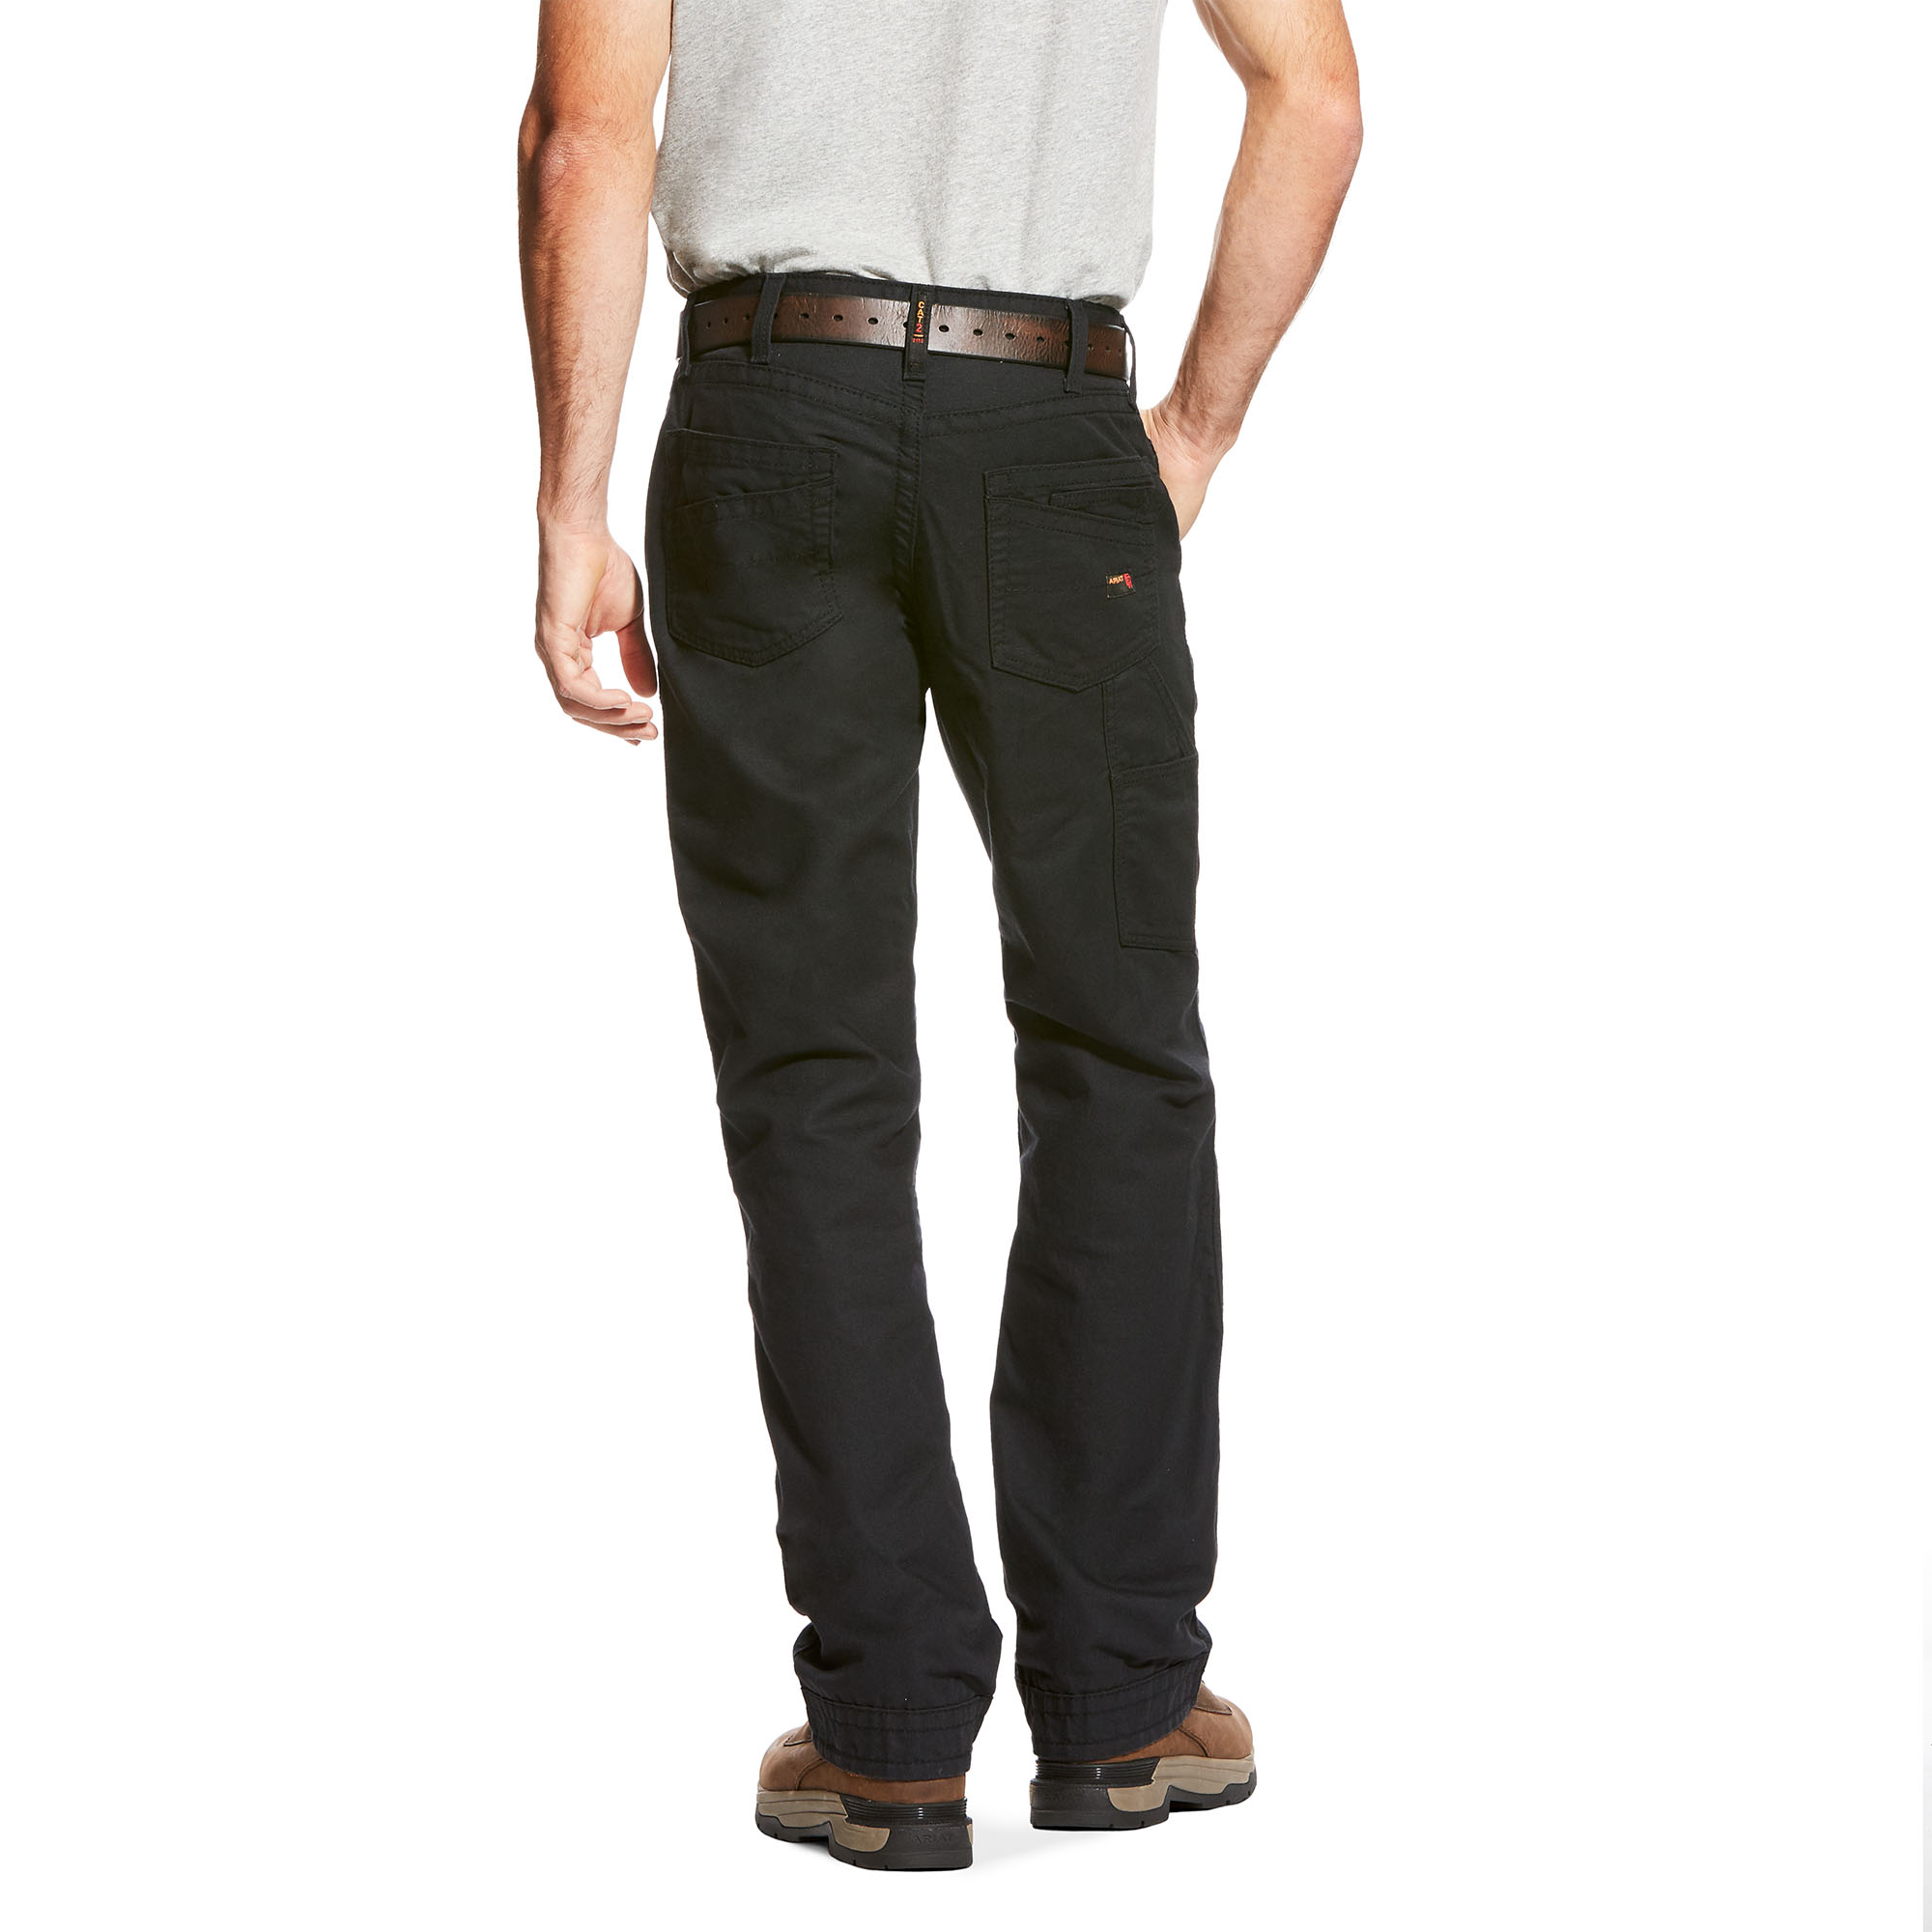 ARIAT WORK PANTS - M4 LOW RISE WORKHORSE BOOT CUT PANT BLACK - Rocky ...